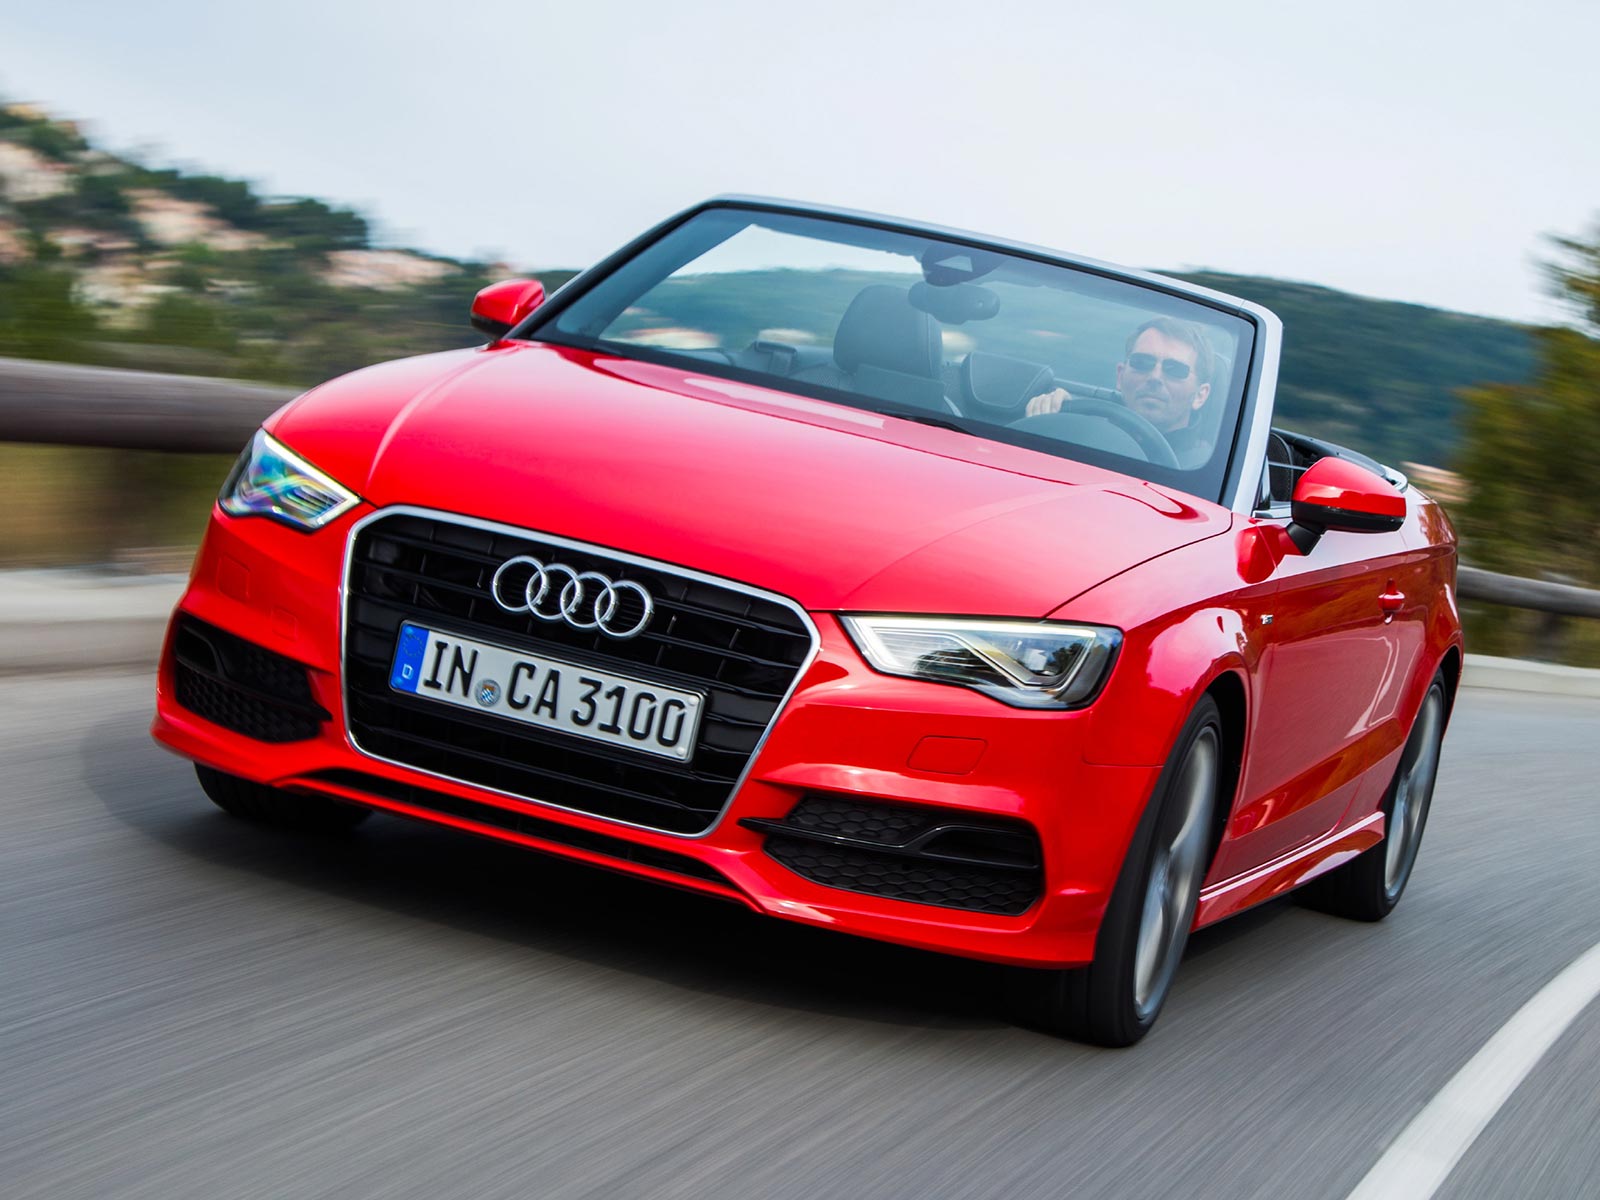 Front view of Audi A3 Cabriolet